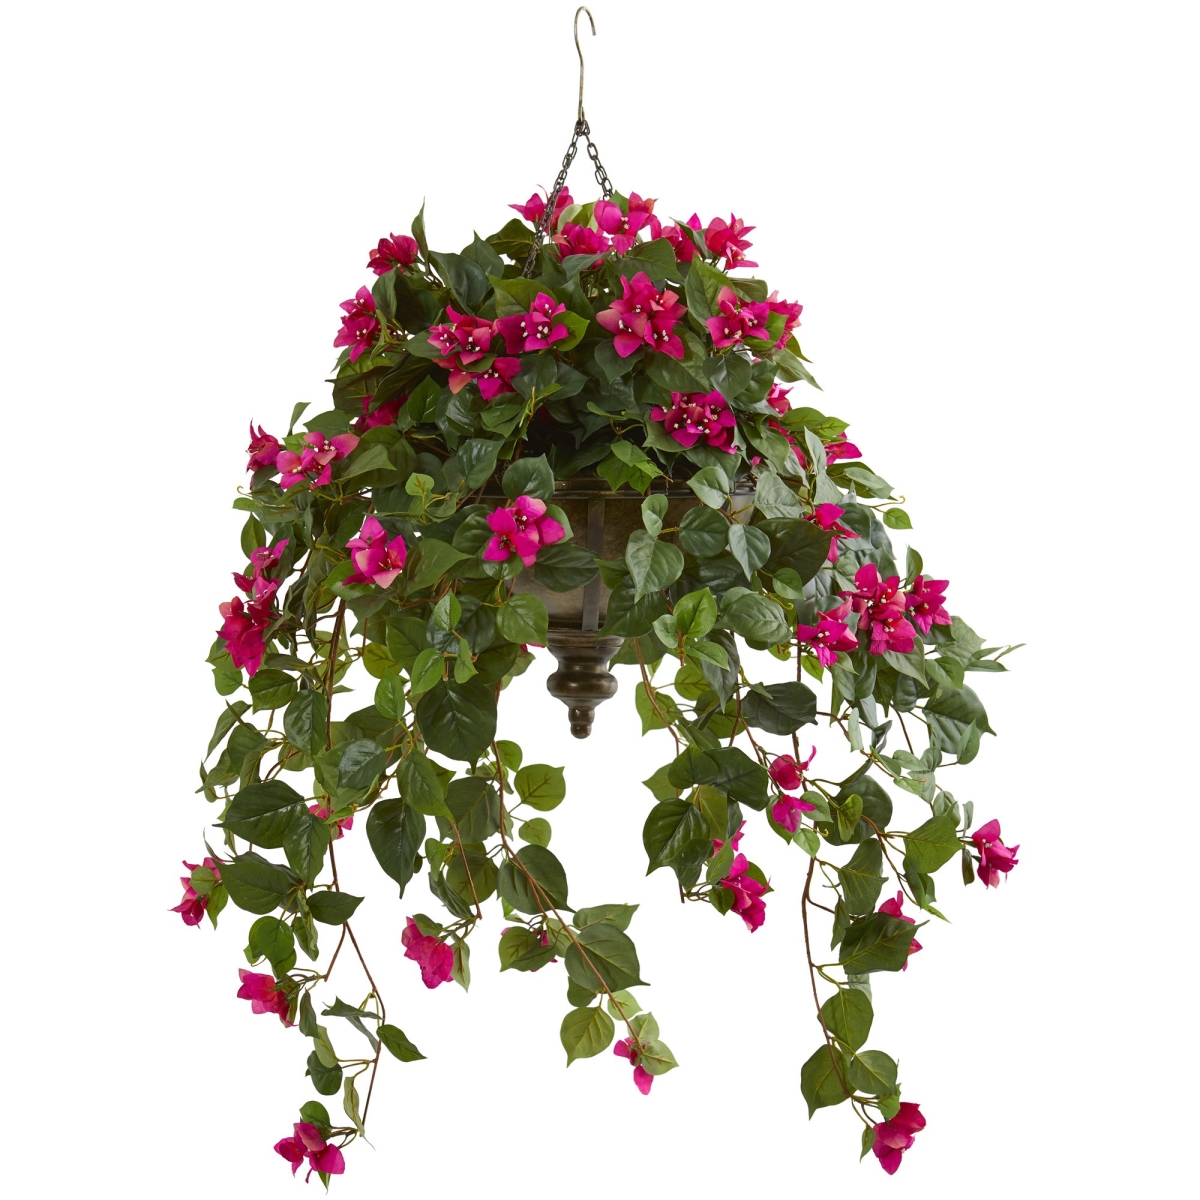 Picture of Nearly Natural 8622-BU 37 in. Bougainvillea Artificial Plant in Hanging Metal Bowl - Beauty